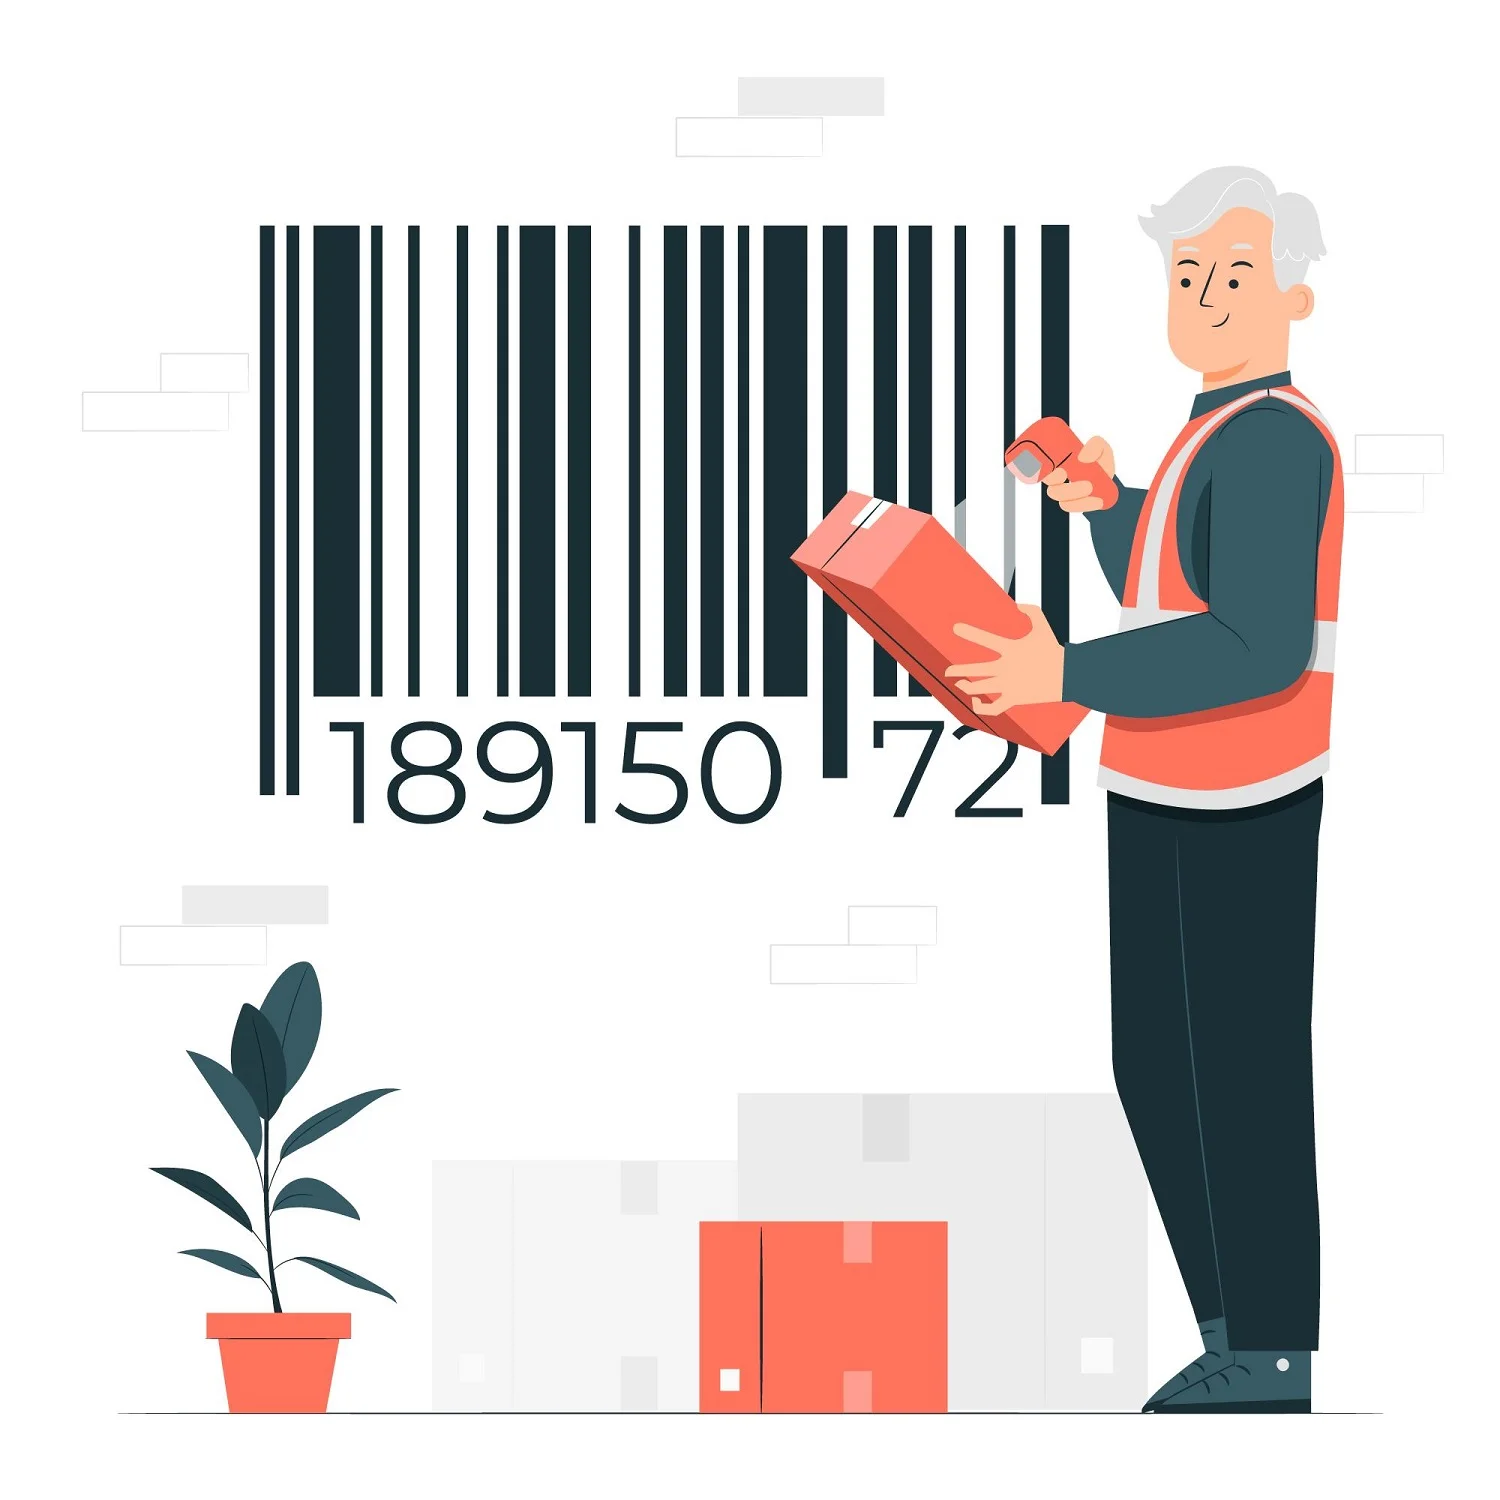 Serial Number Tracking: A Comprehensive Guide for Small Business